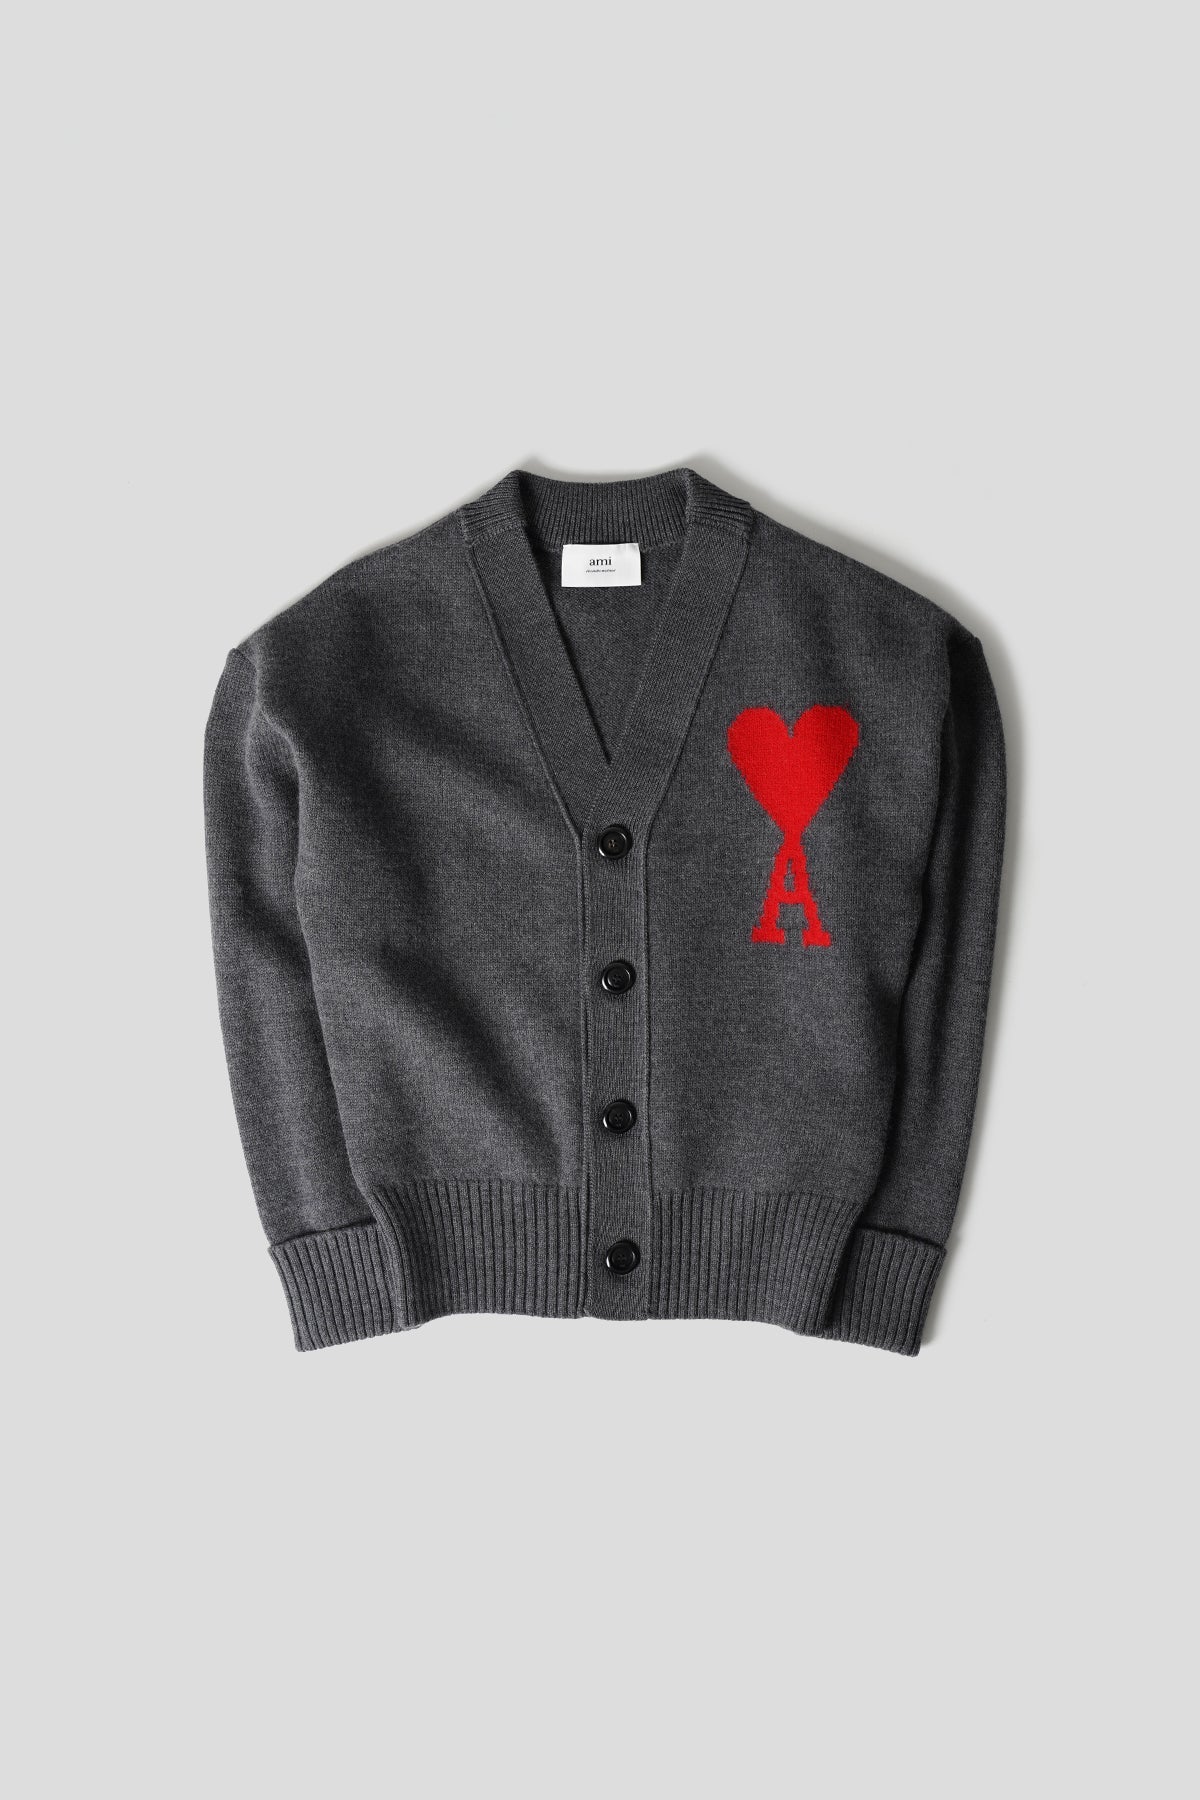 AMI PARIS   HEART FRIEND CARDIGAN GREY AND RED – LE LABO STORE